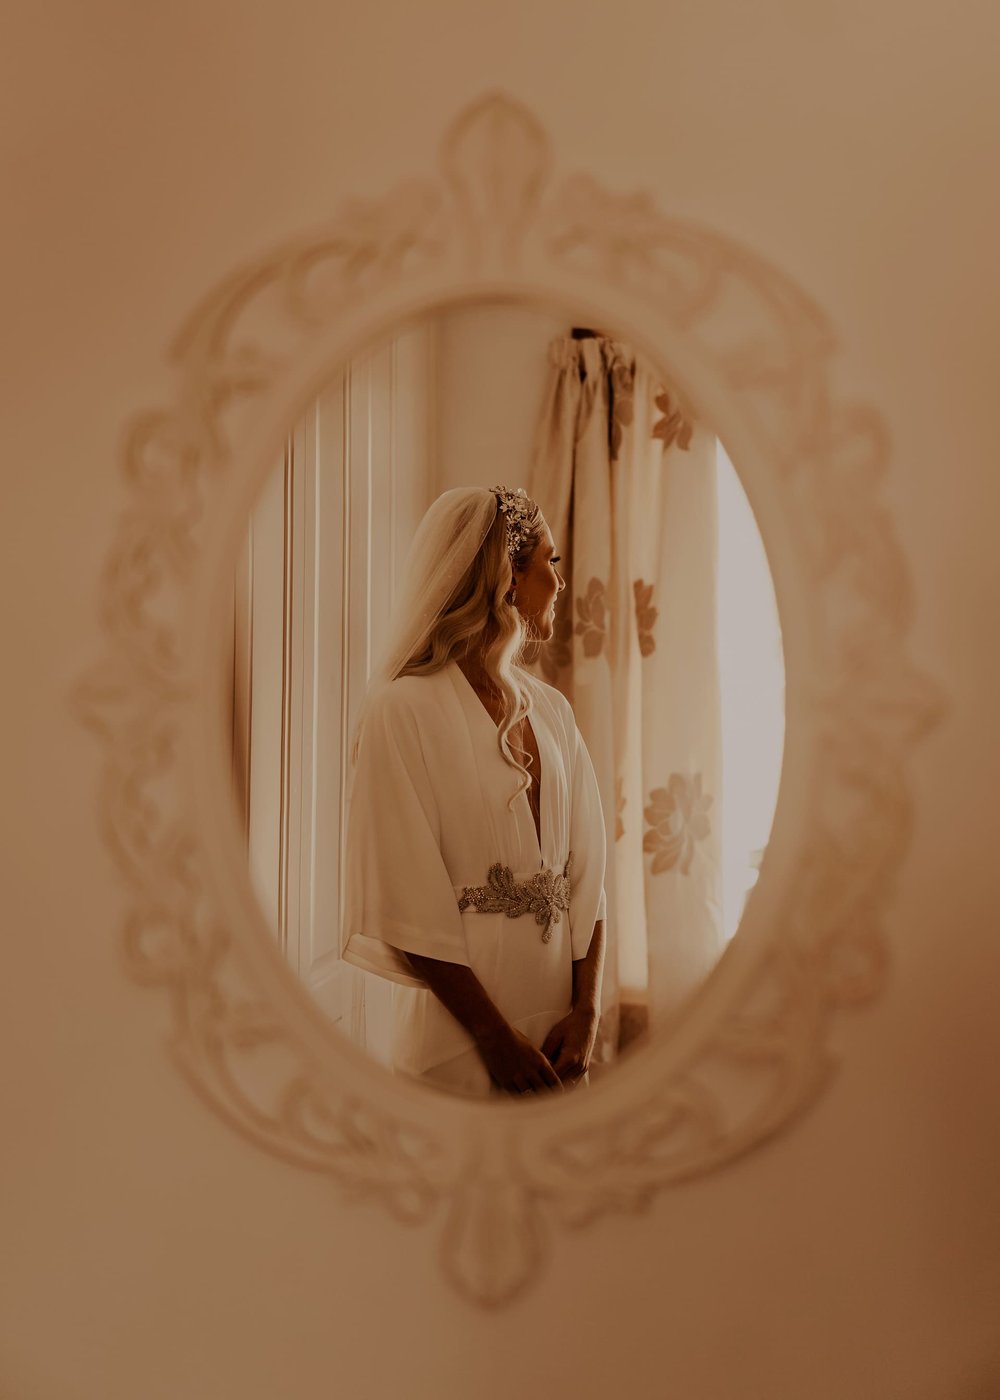 An image of a mirror showing Lucy looking out of a window, in her wedding dress, headband, belt and veil.